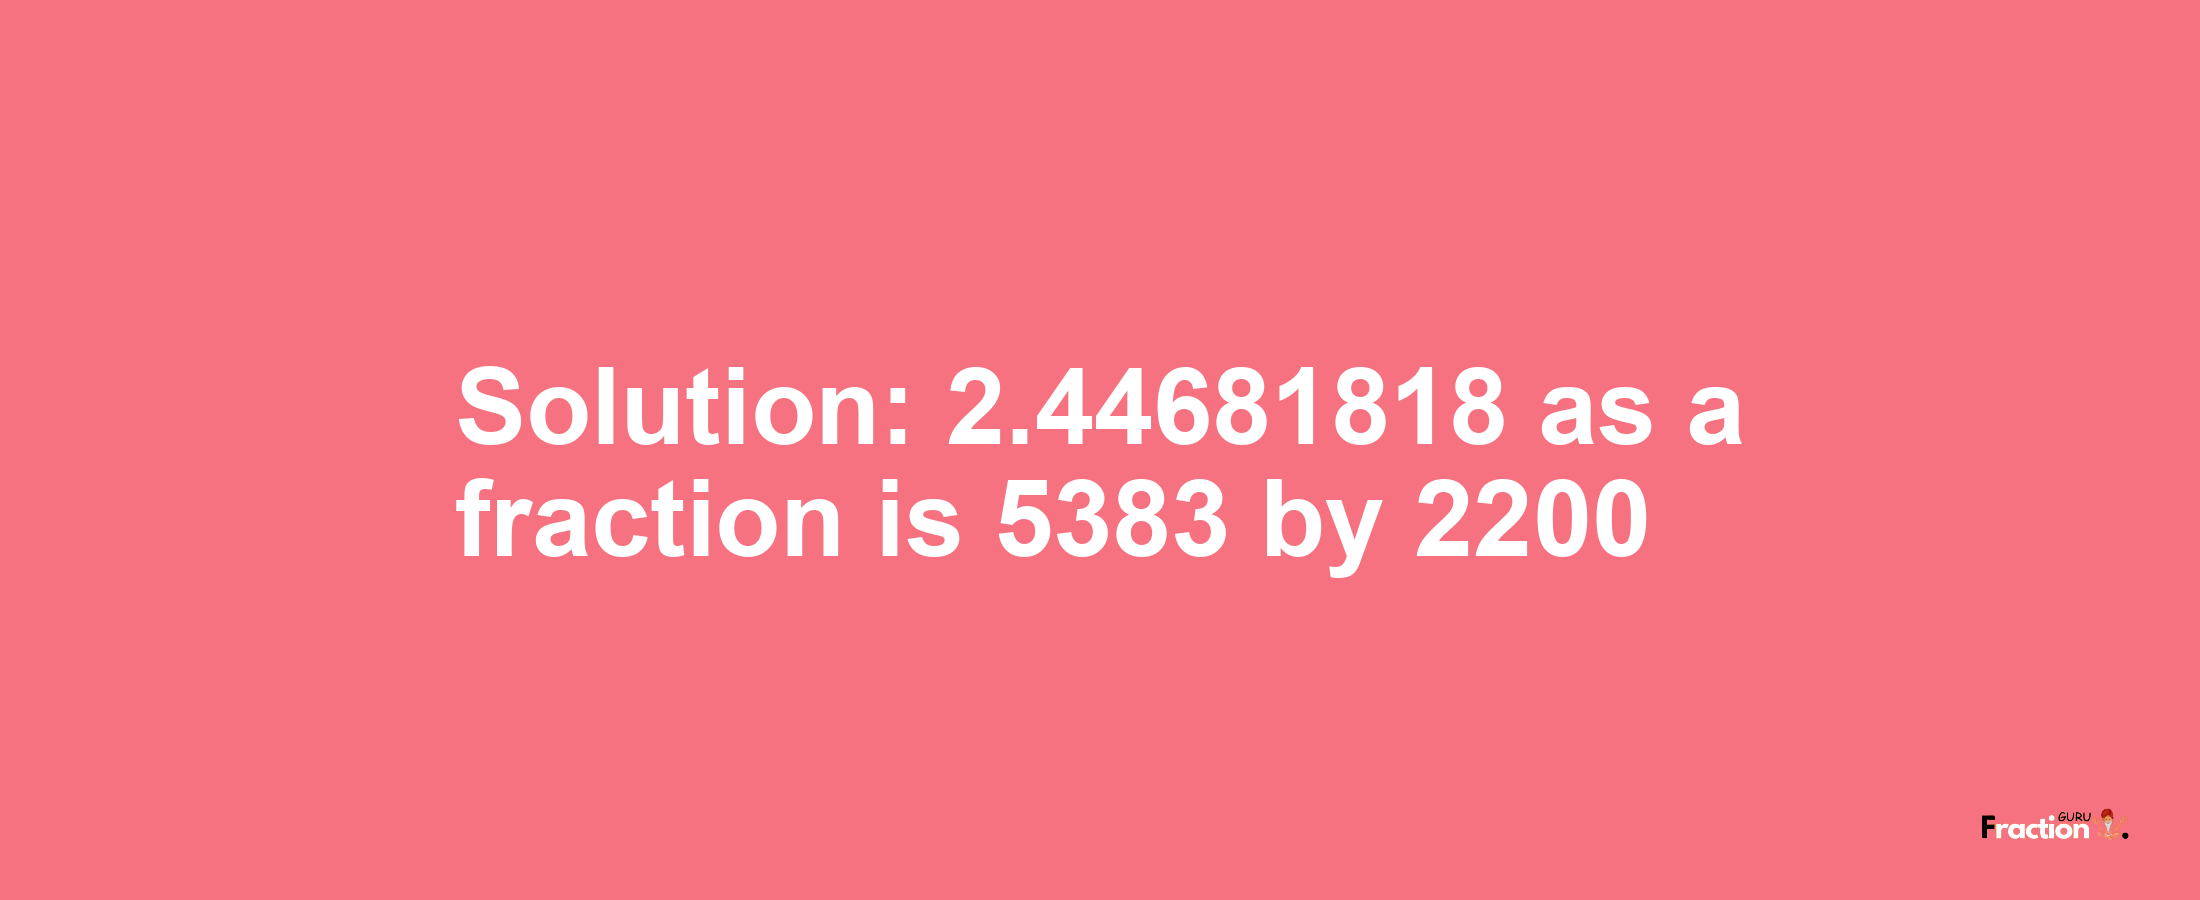 Solution:2.44681818 as a fraction is 5383/2200